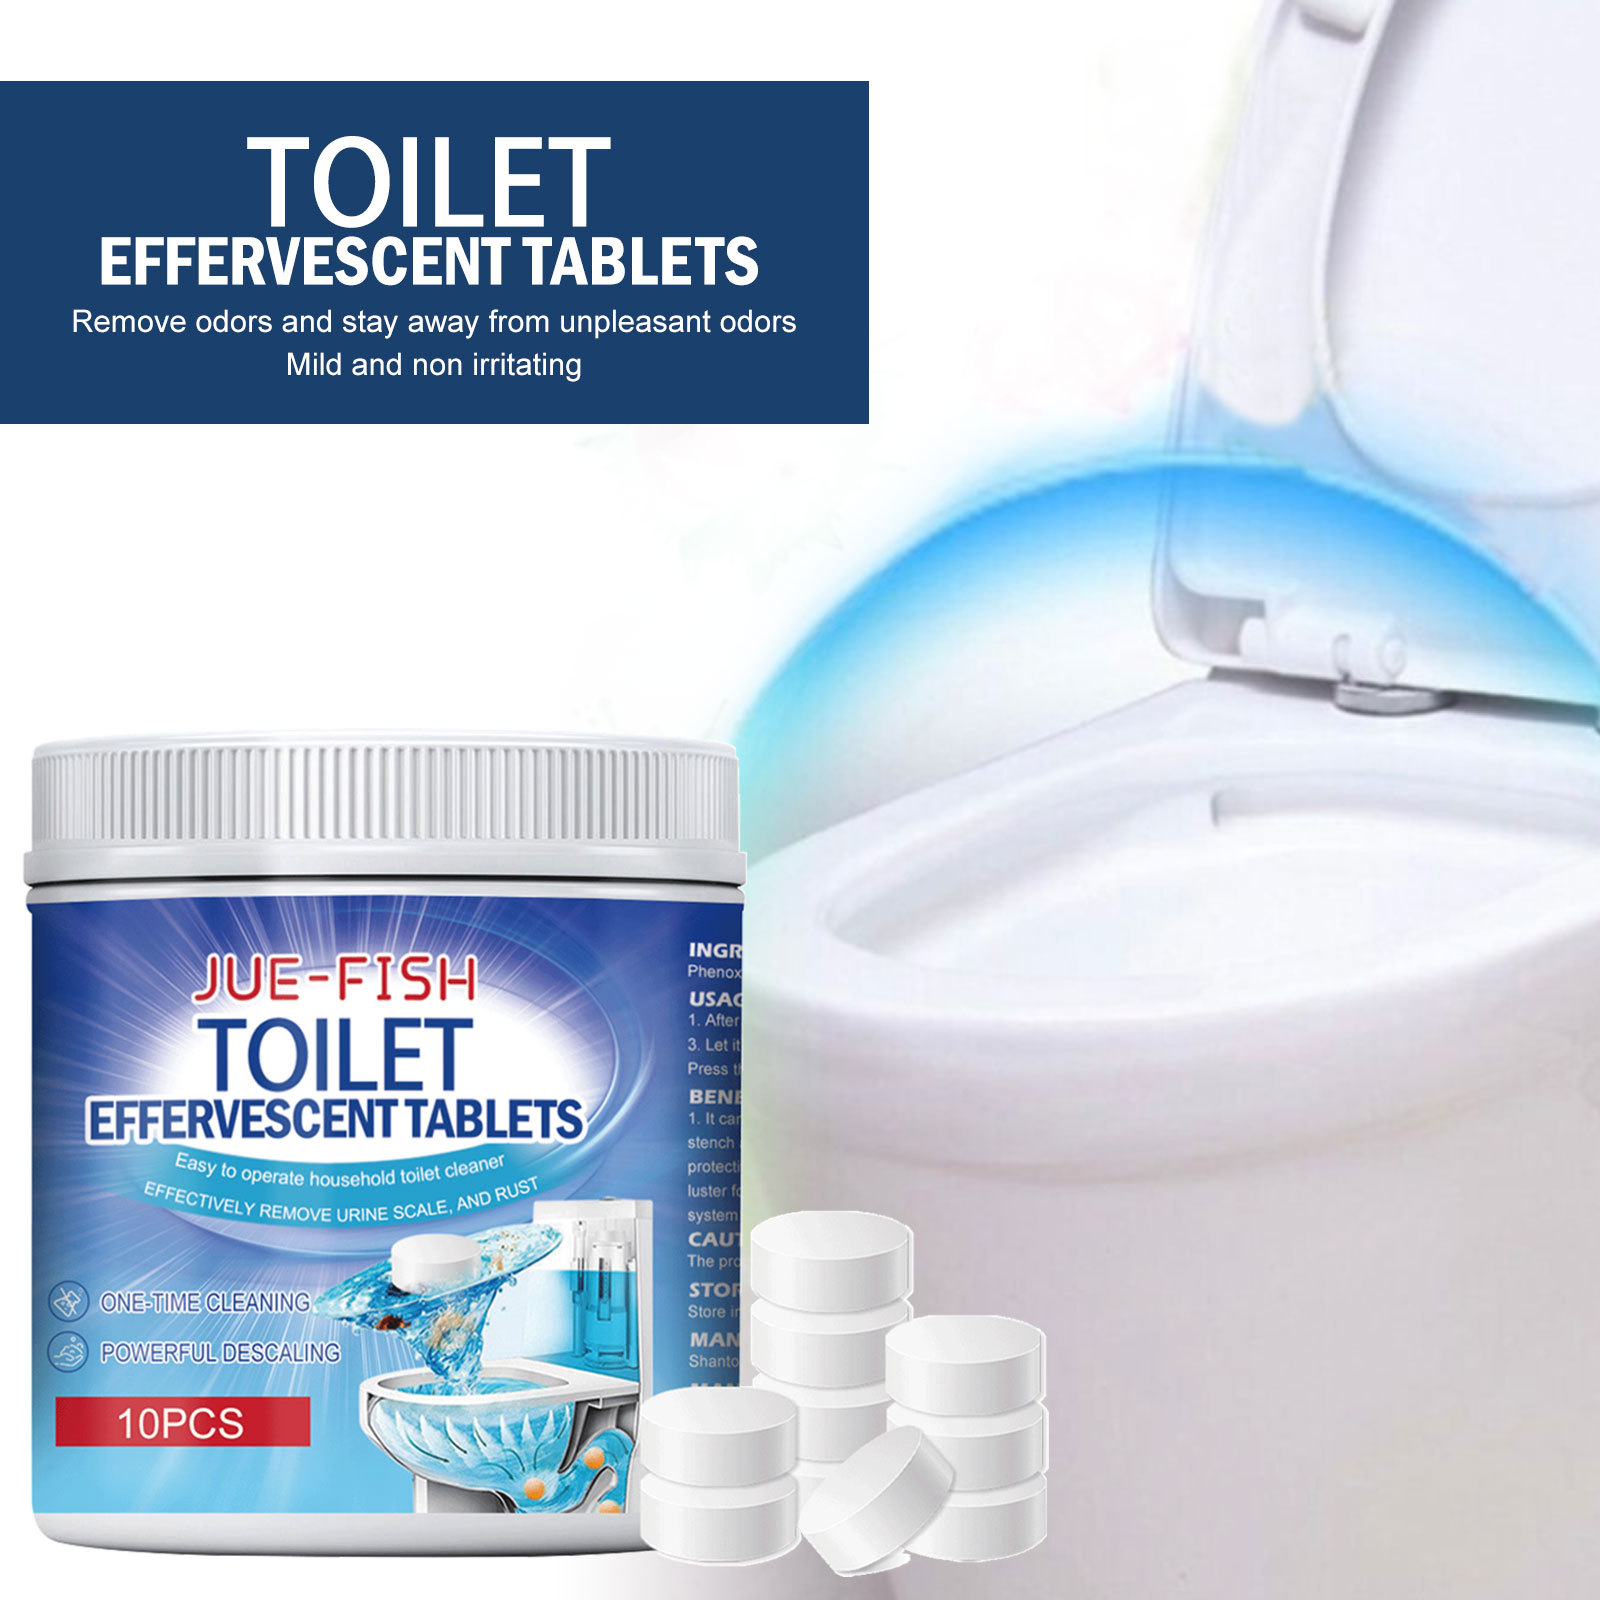 Jue-Fish Toilet Effervescent Tablets